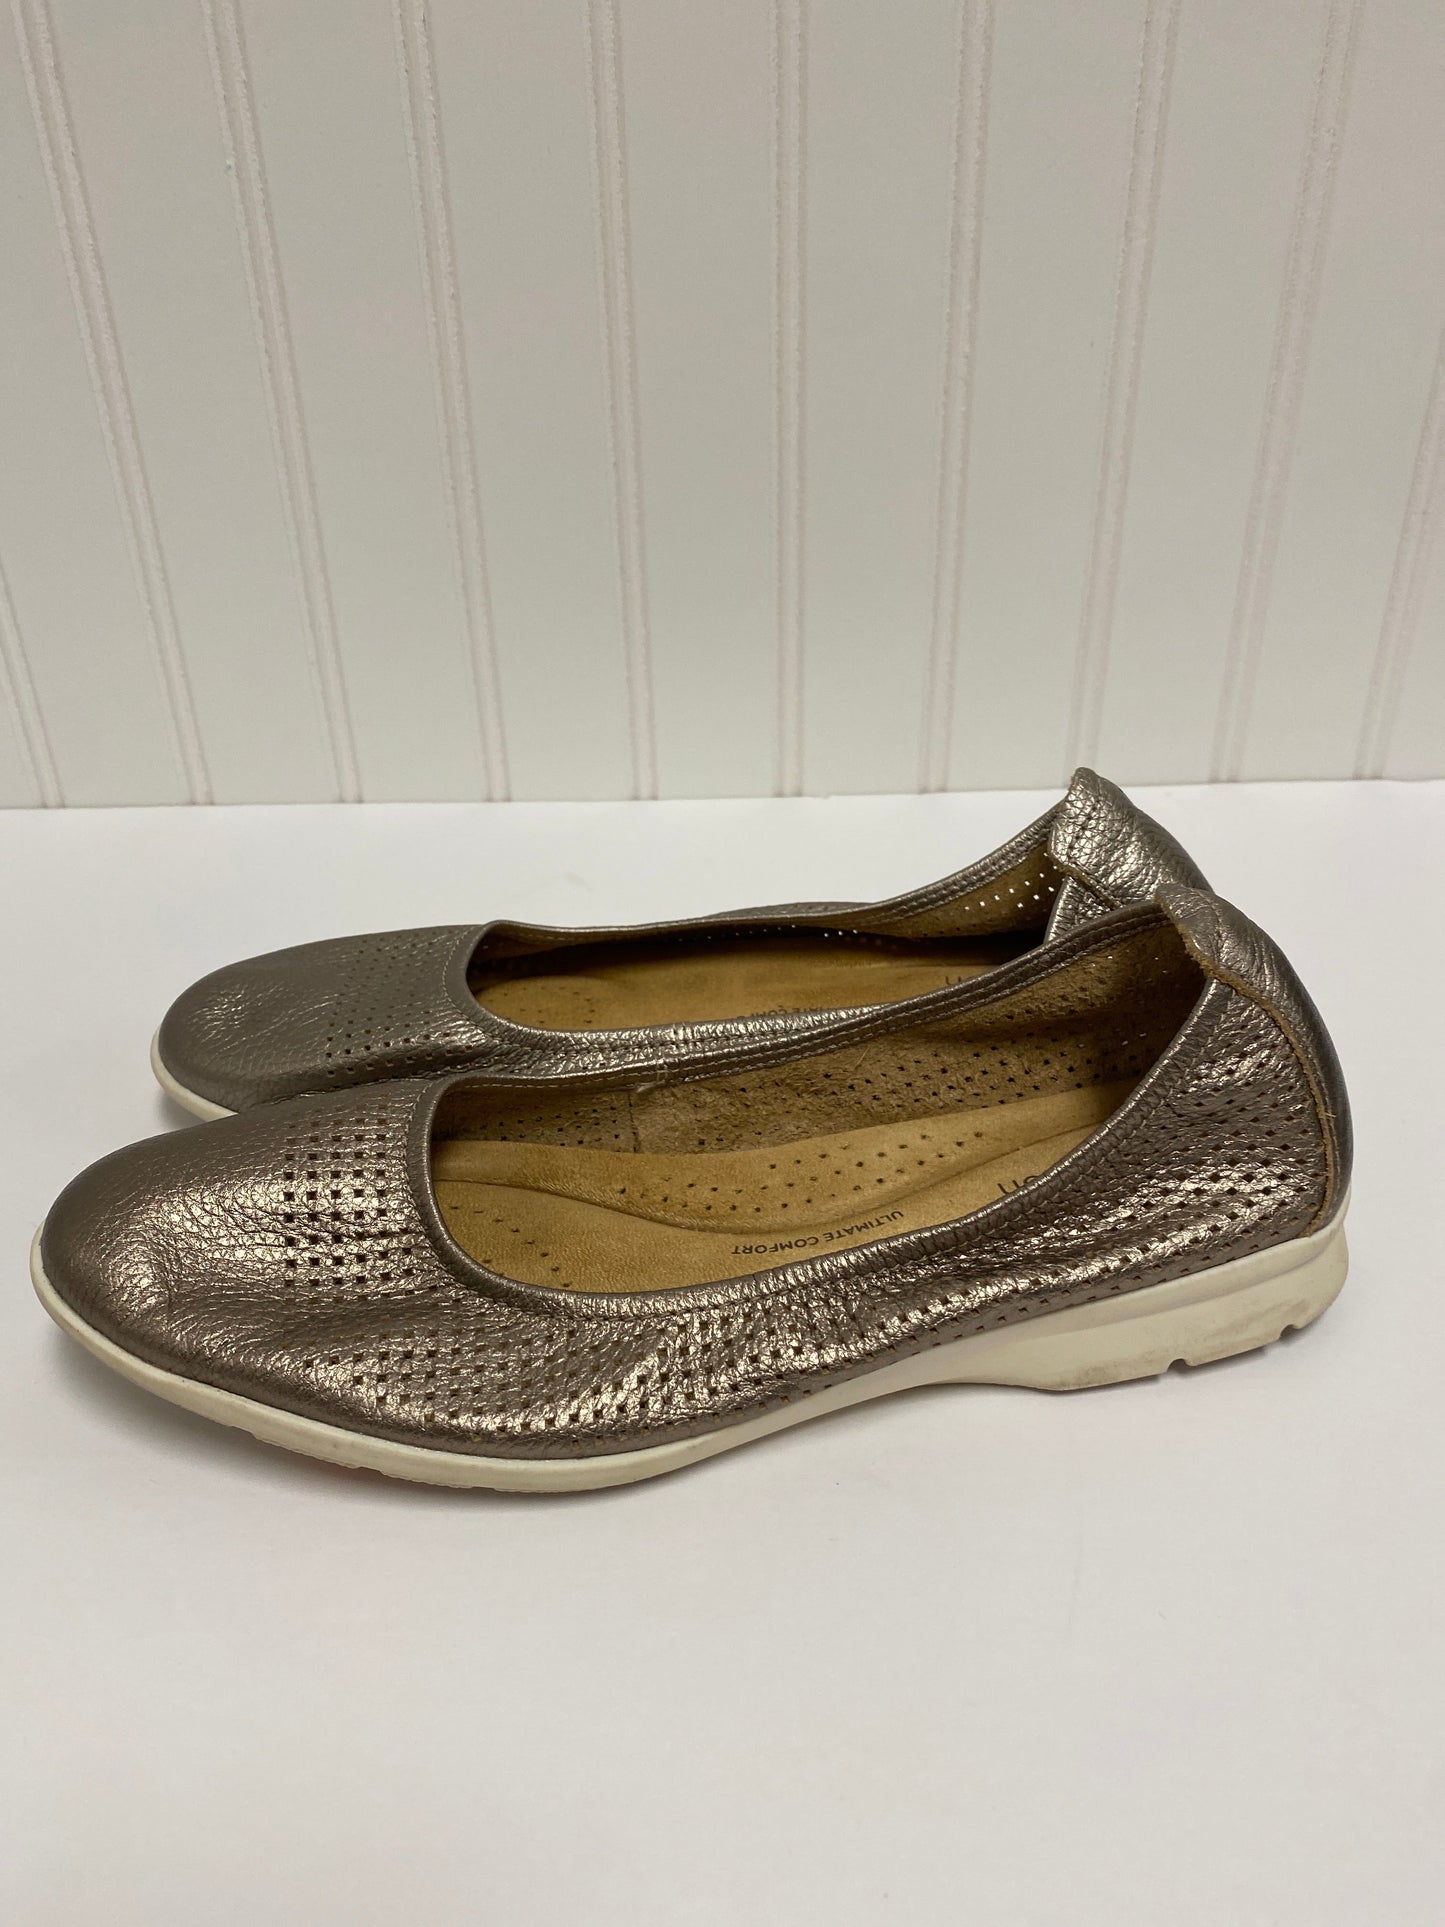 Shoes Flats By Clarks  Size: 7